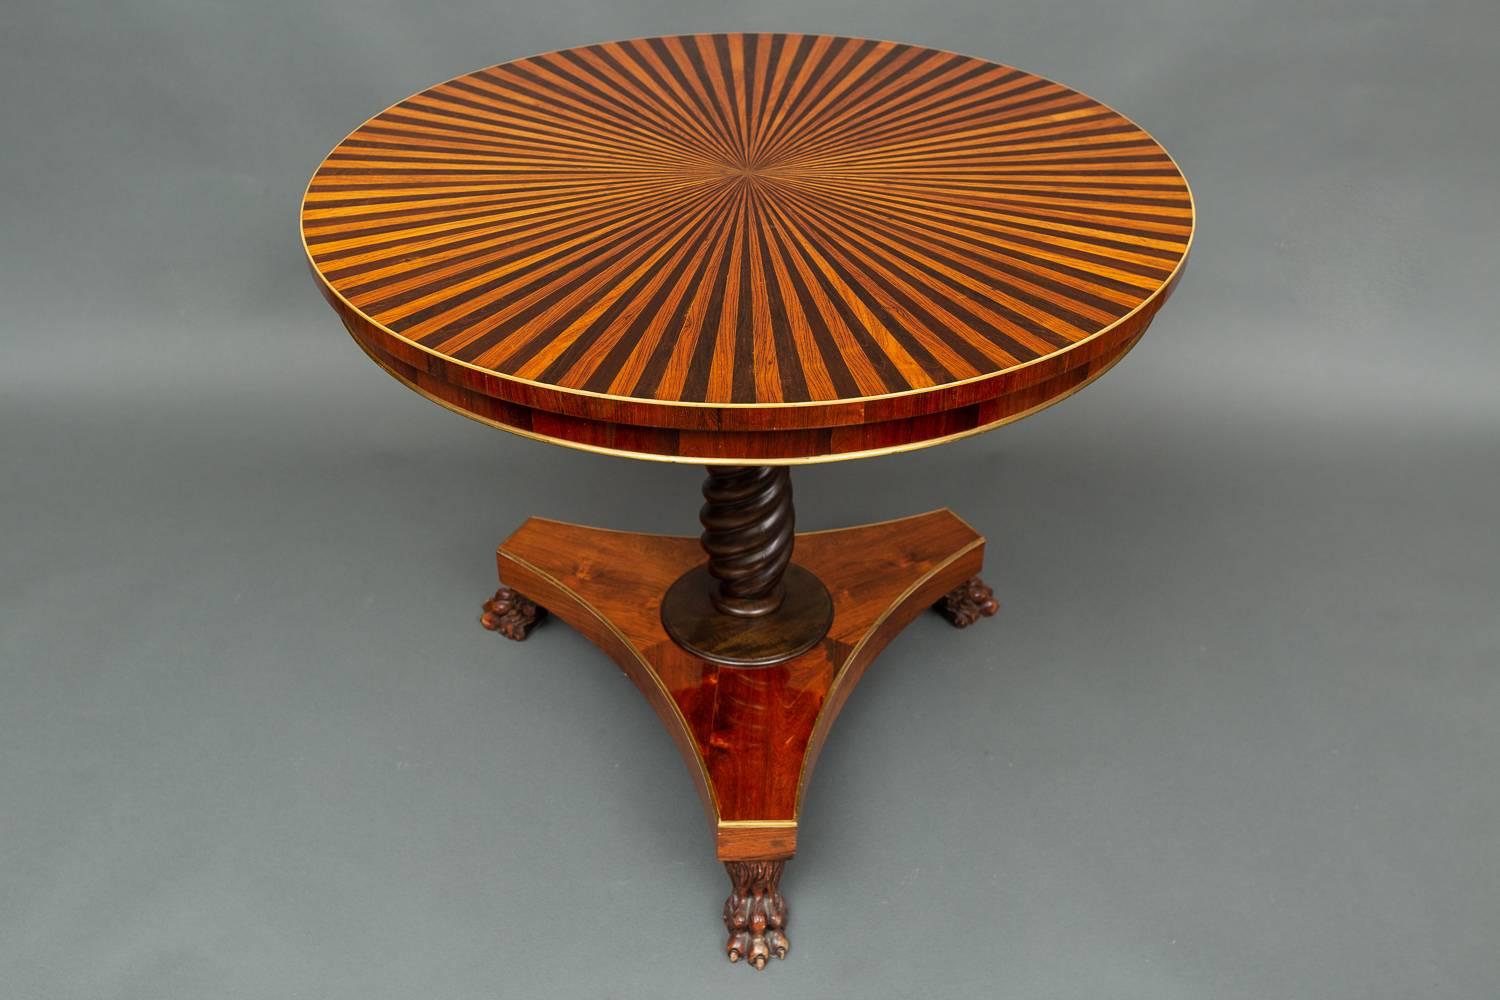 Pair of Regency-style mahogany and fruitwood parquetry small centre tables
stamped 